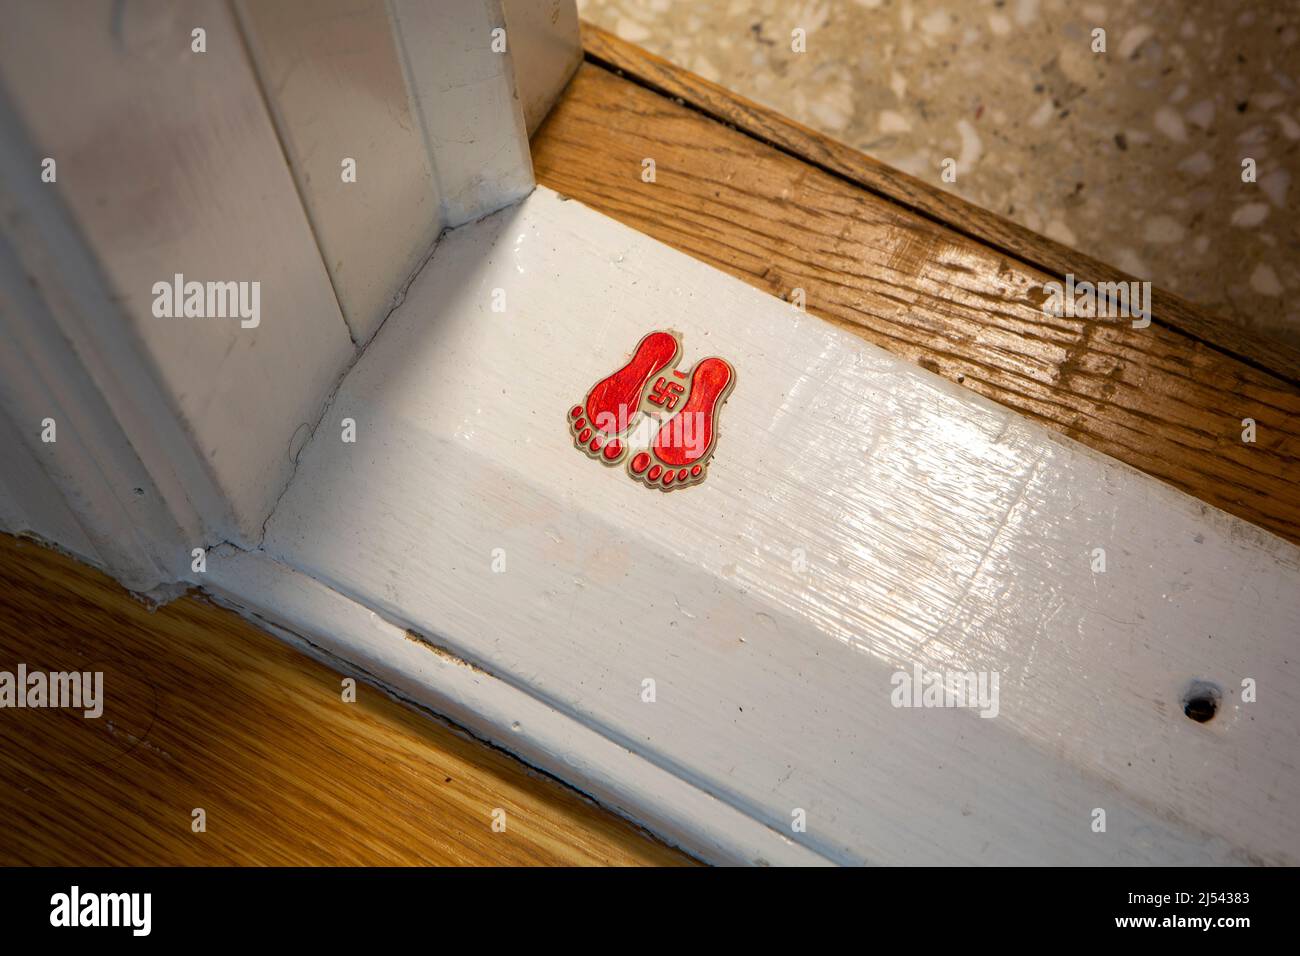 The swastika on a threshold means prosperity. Stock Photo